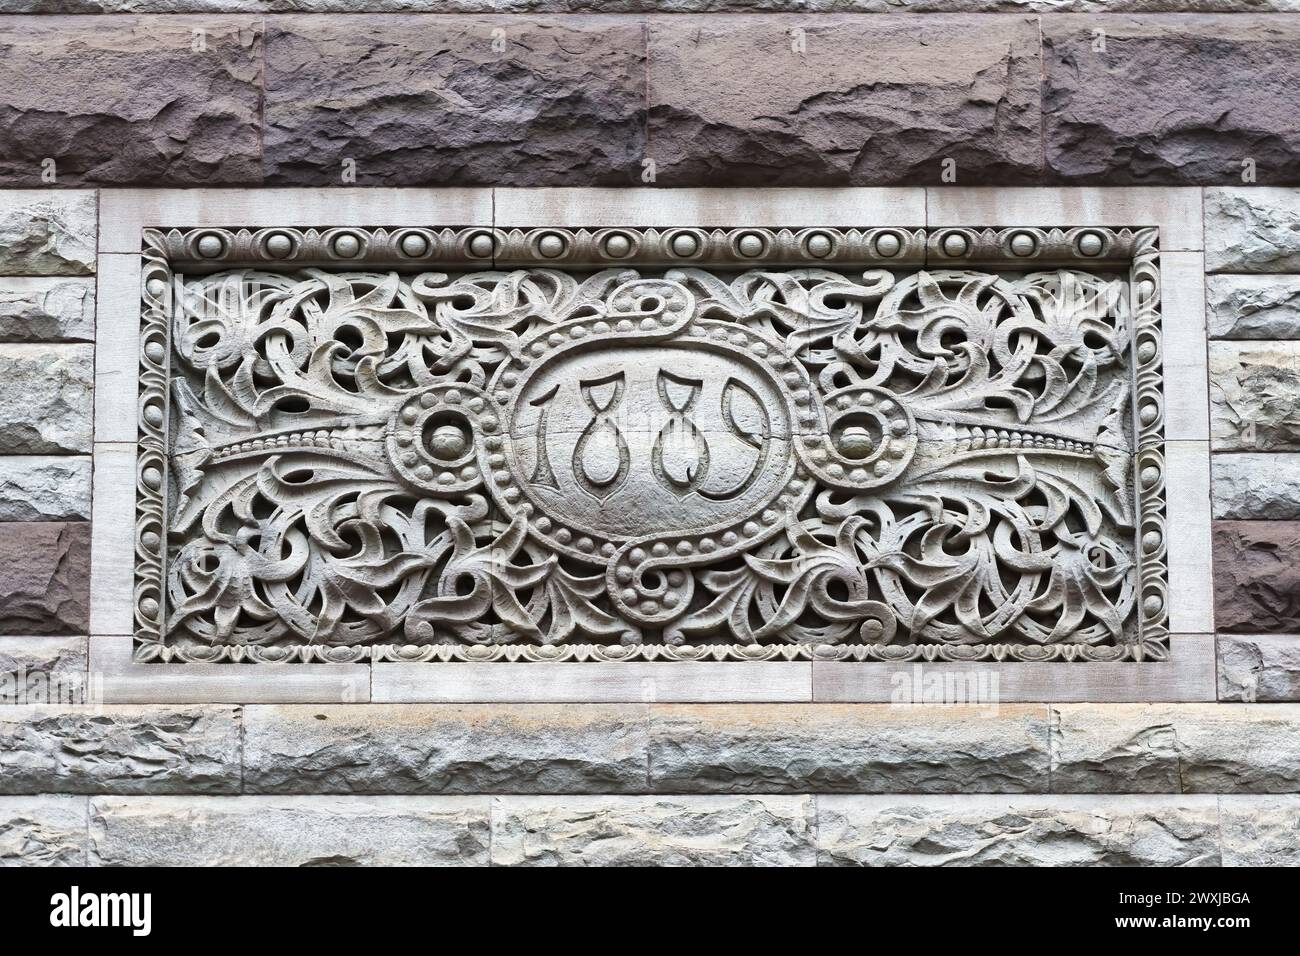 Colonial architectural features or details in Old City Hall Building (1898), Toronto, Canada. Part of a series. Stock Photo